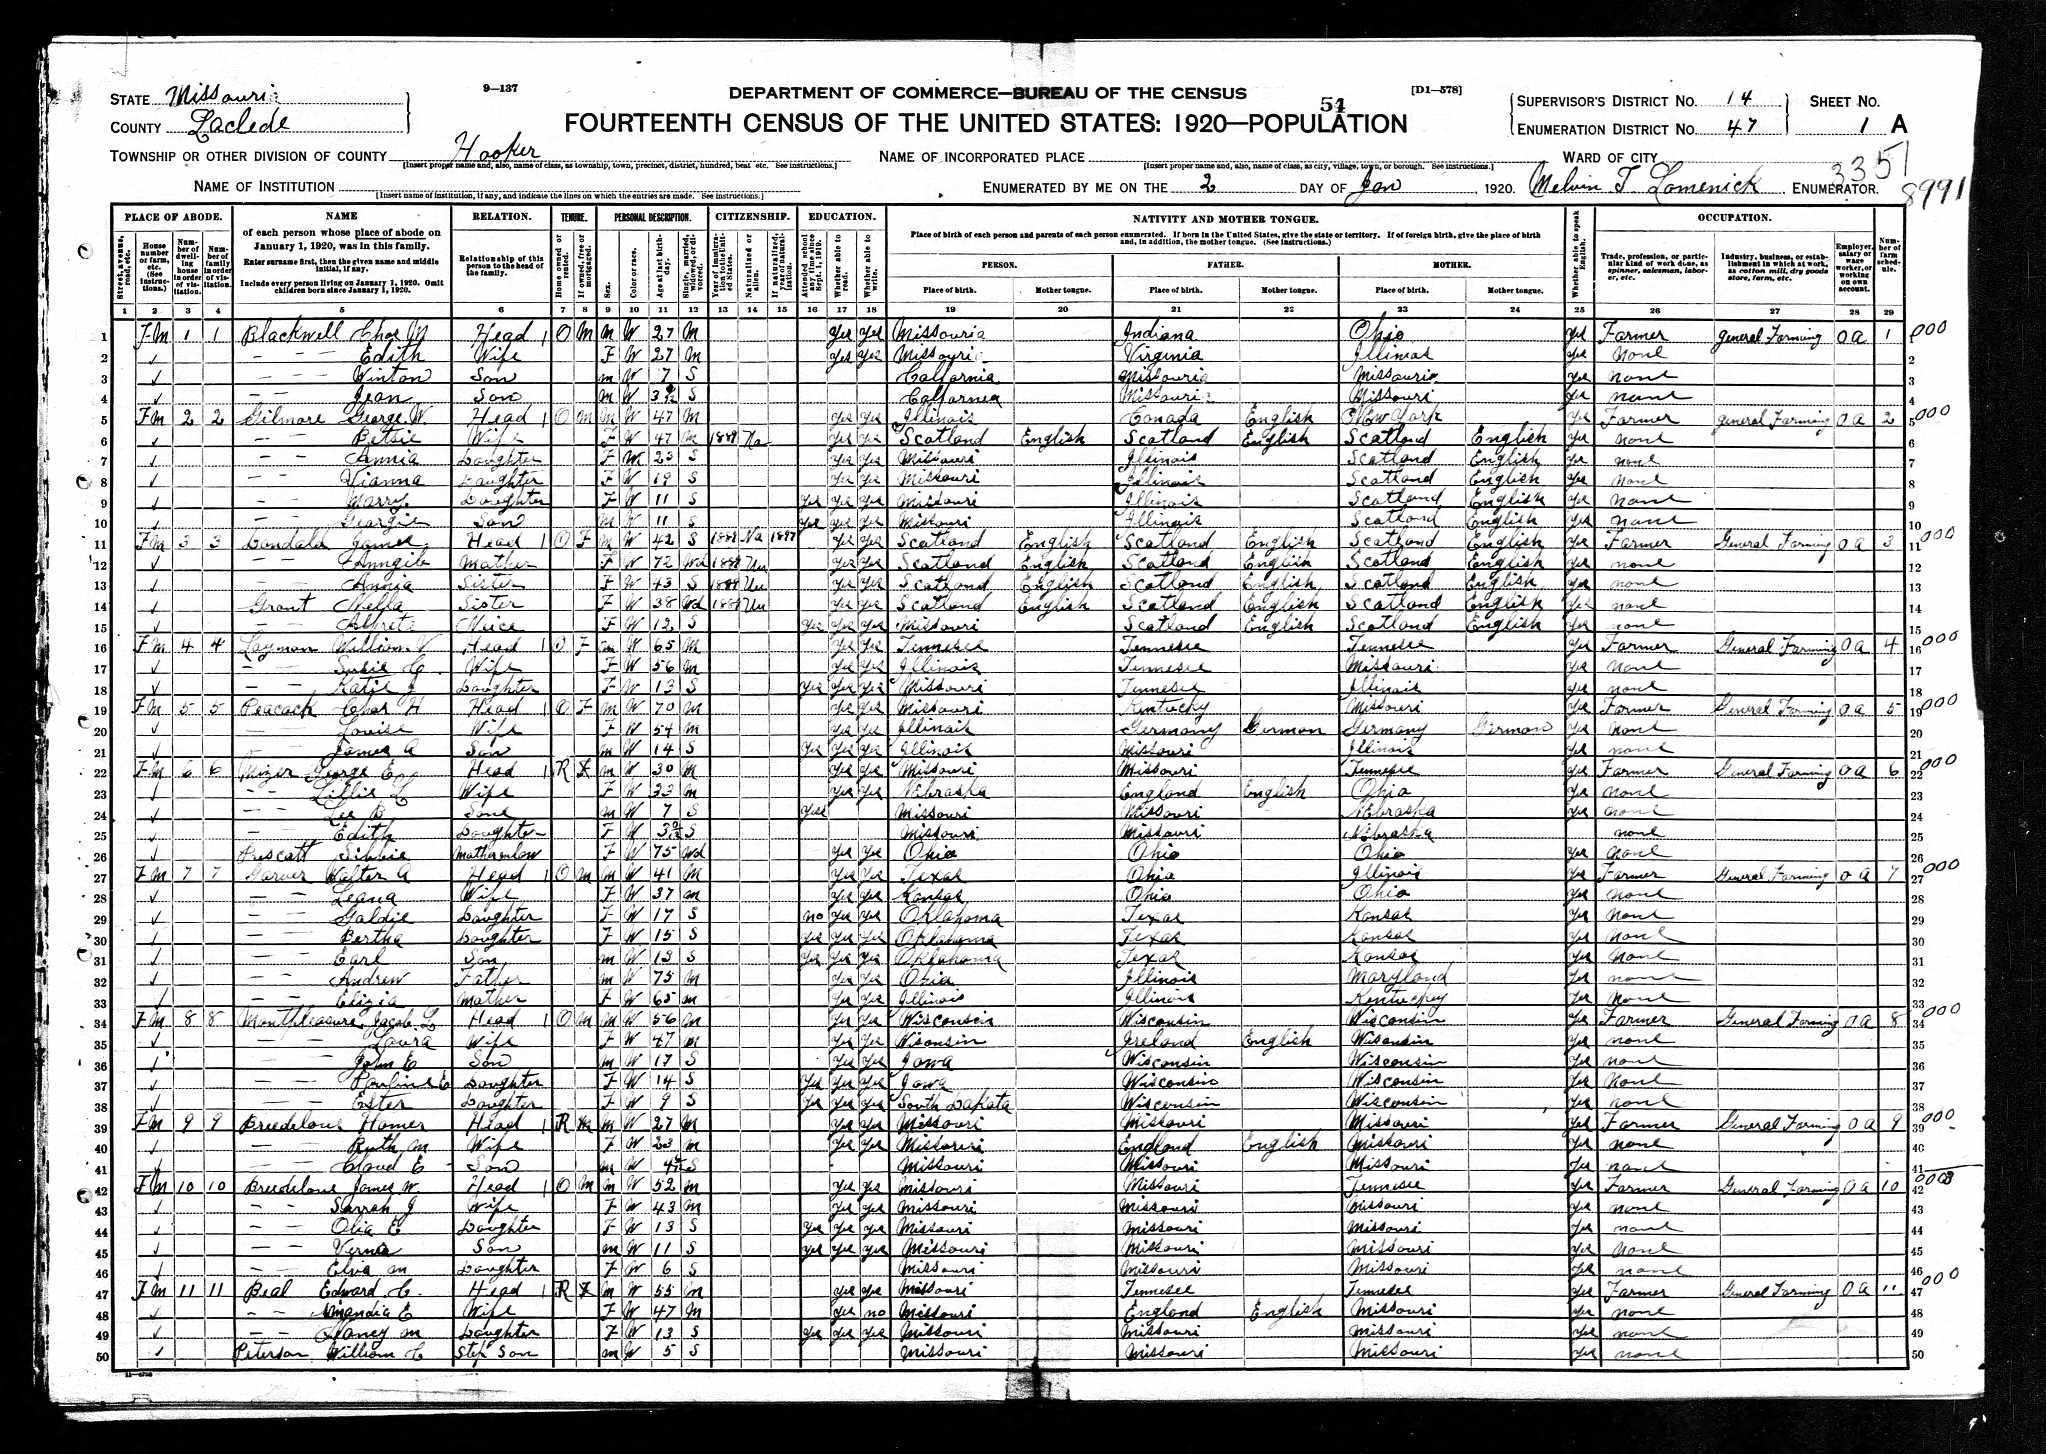 George Gilmore, 1920 Laclede County, Missouri, census